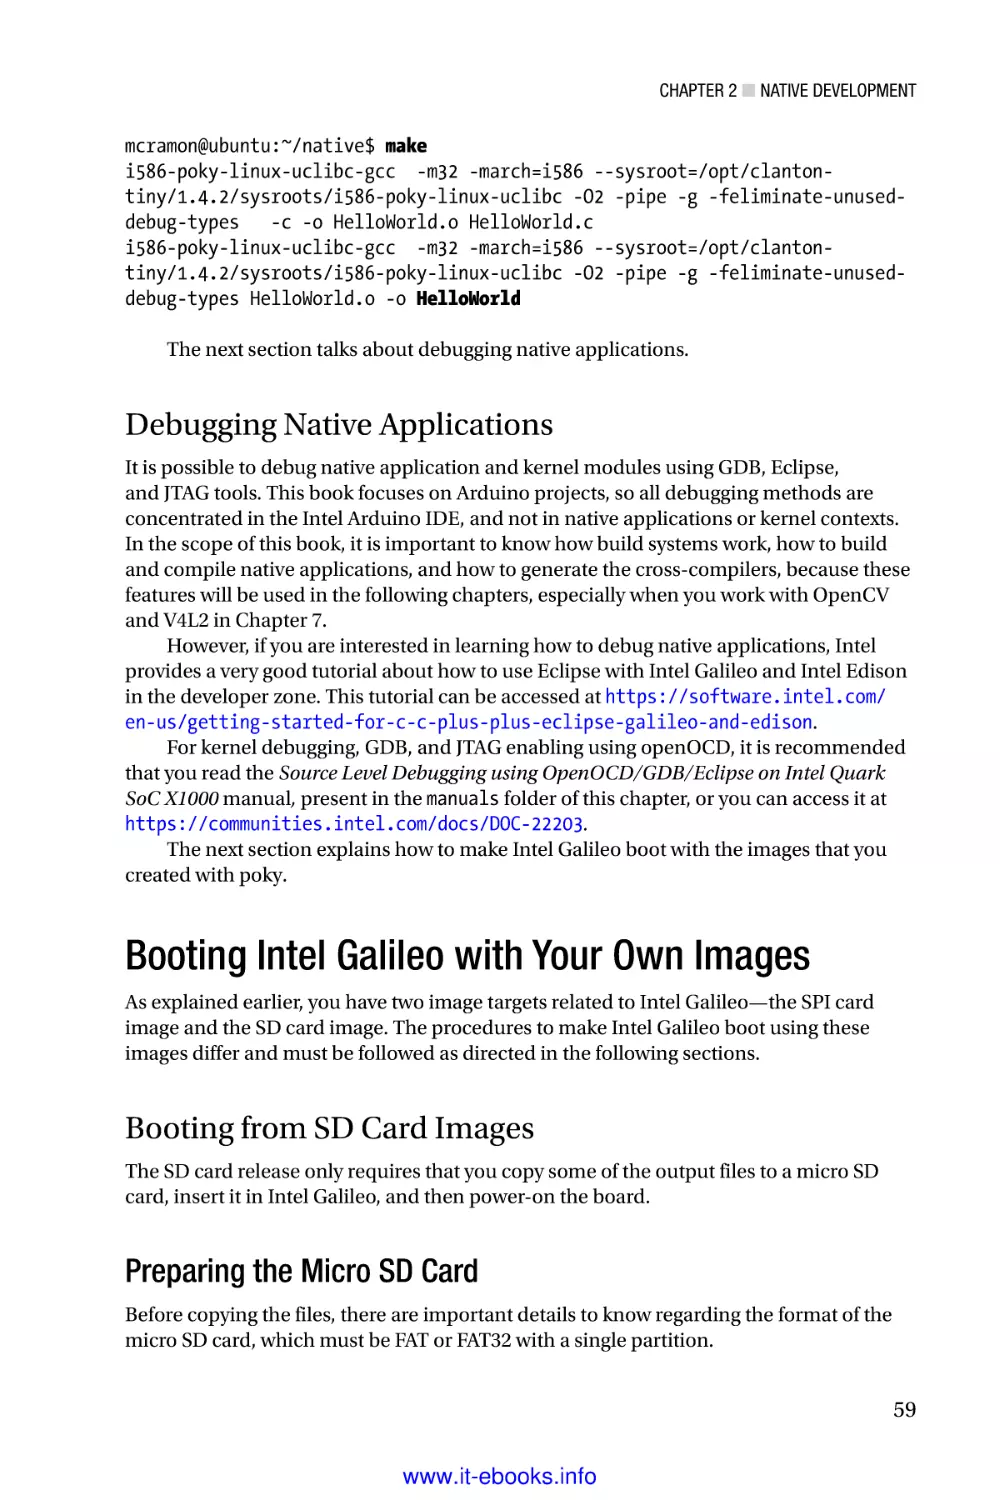 Debugging Native Applications
Booting Intel Galileo with Your Own Images
Booting from SD Card Images
Preparing the Micro SD Card